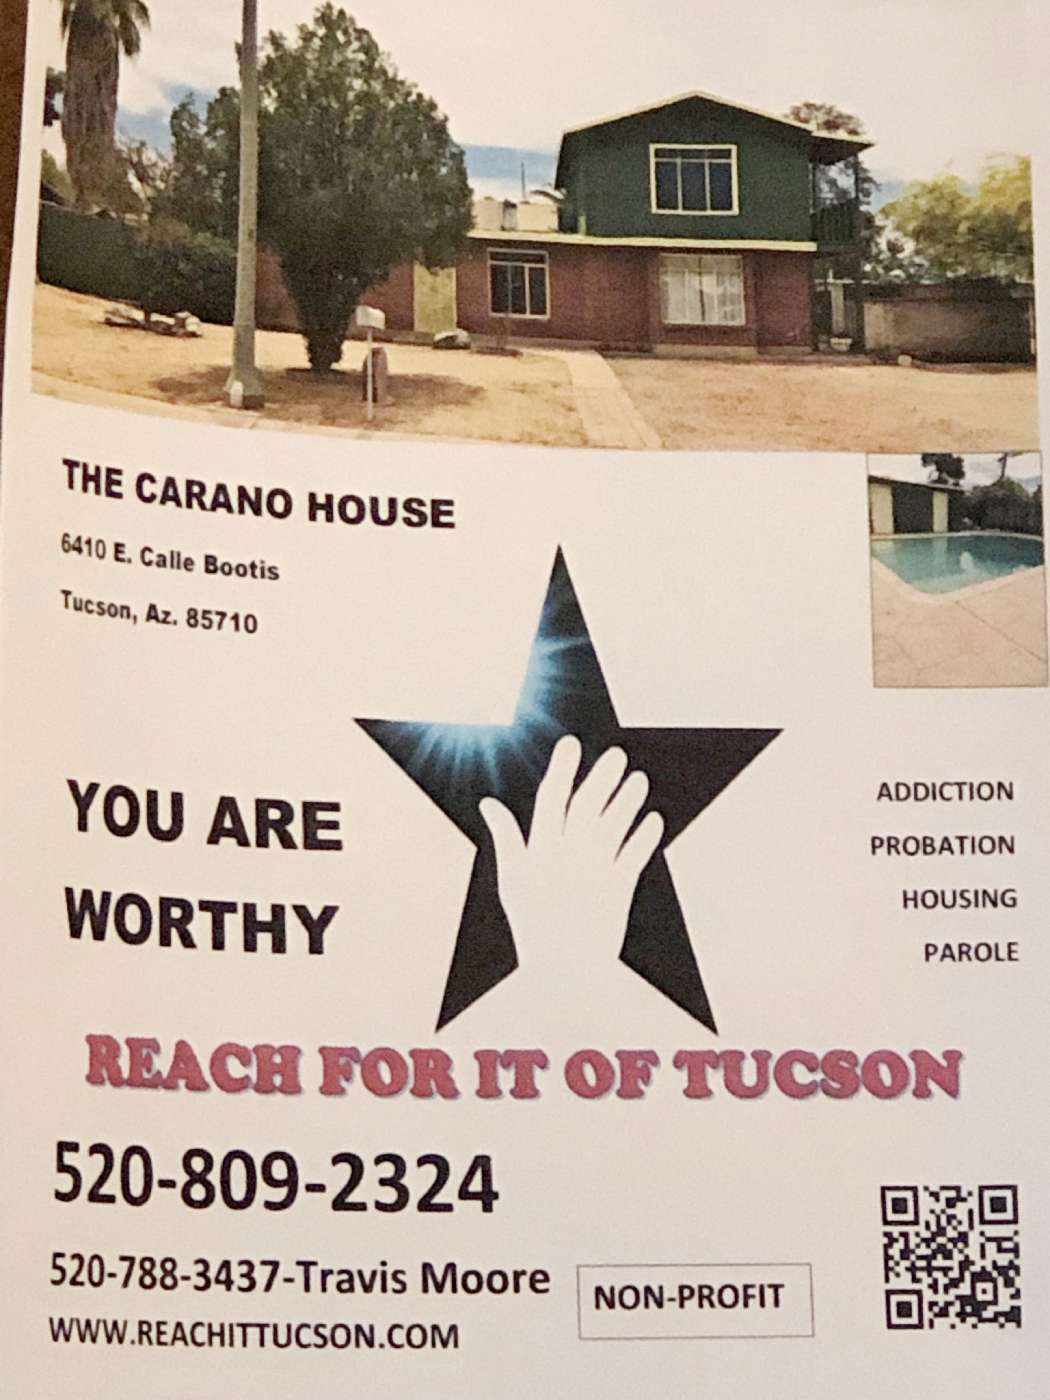 Reach for it Tucson, Carano House, flier, poster